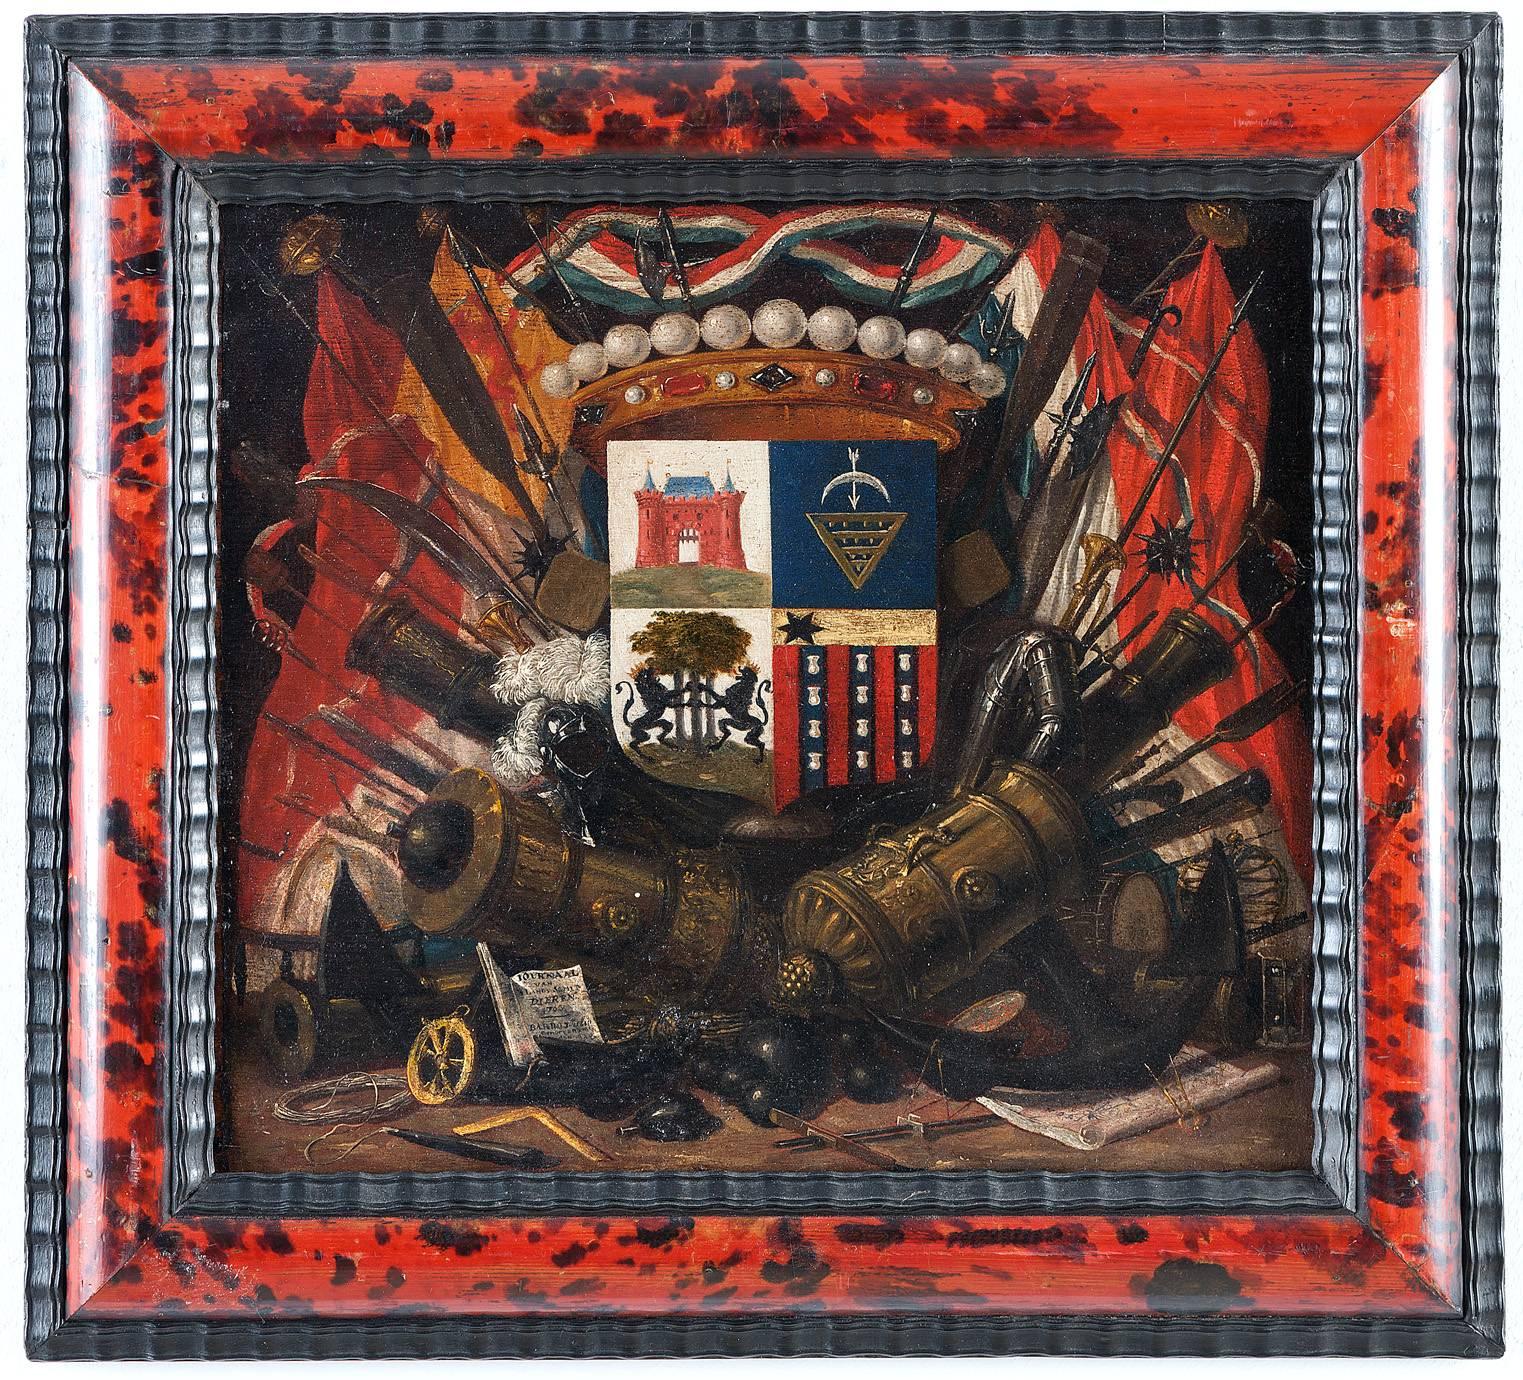 Unknown Still-Life Painting - Coat of Arms of a Ship of the Dutch East India Company (VOC)